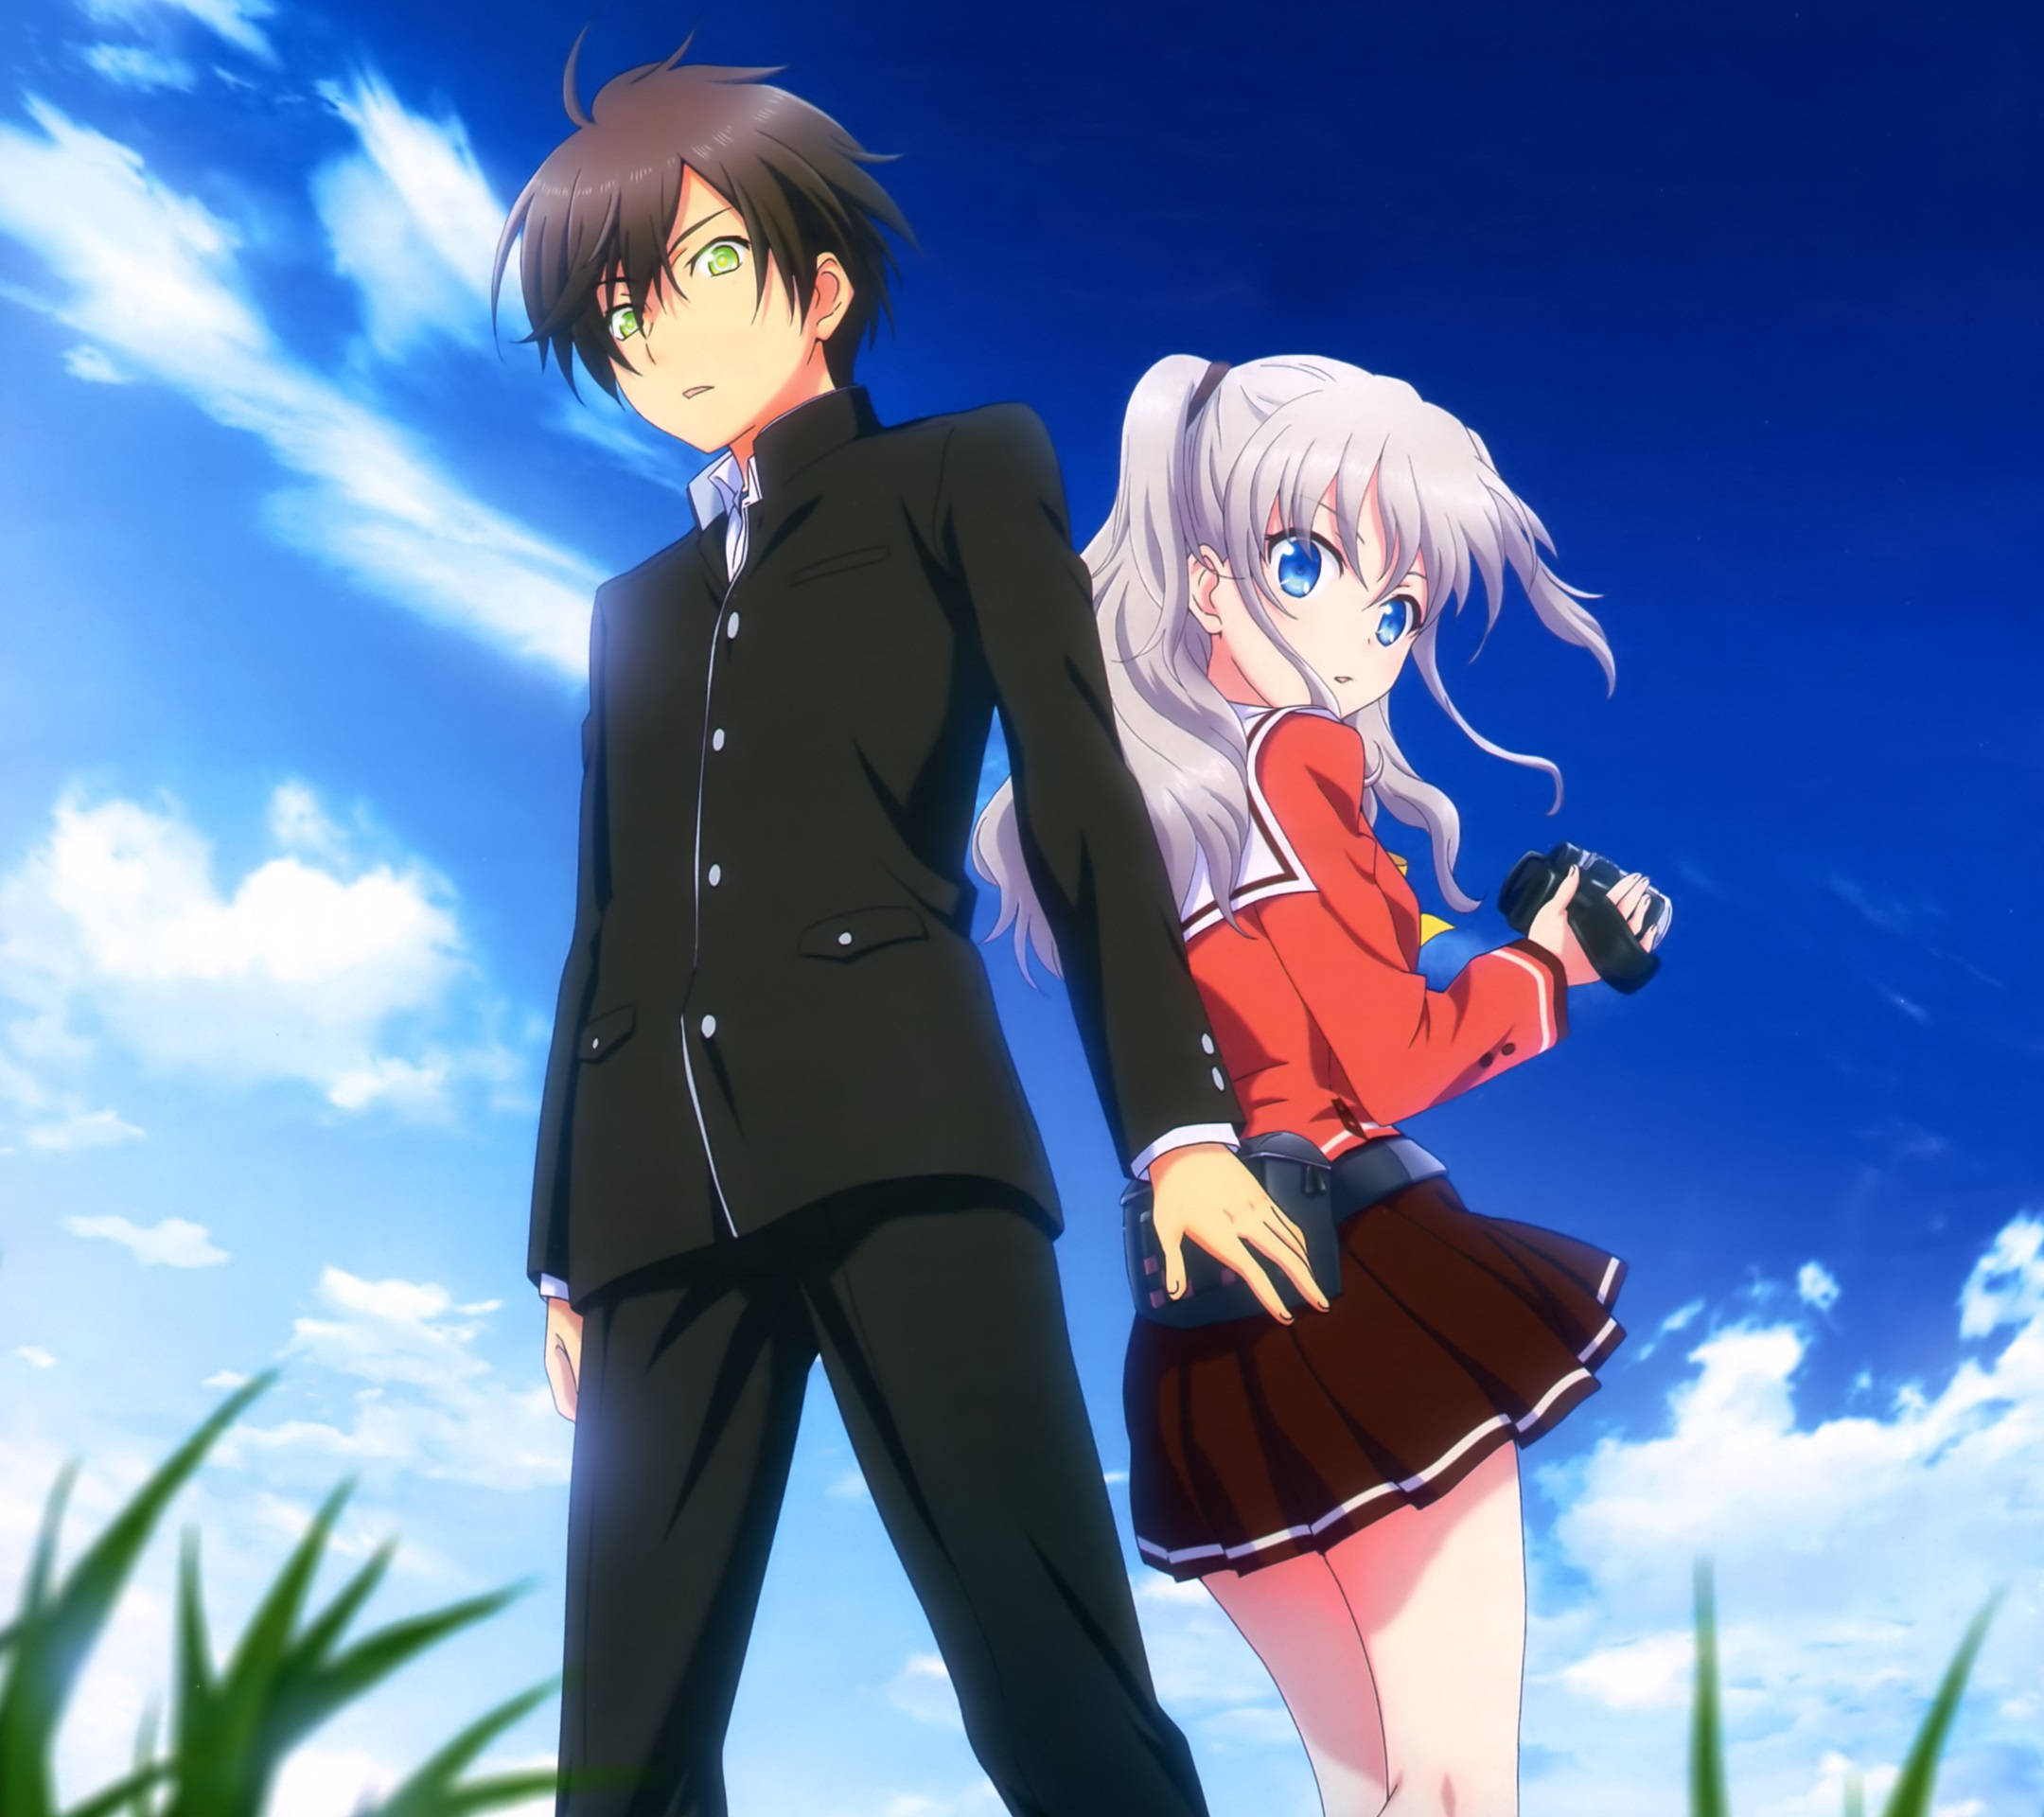 Download Anime Couple Charlotte Wallpaper Wallpapers Com